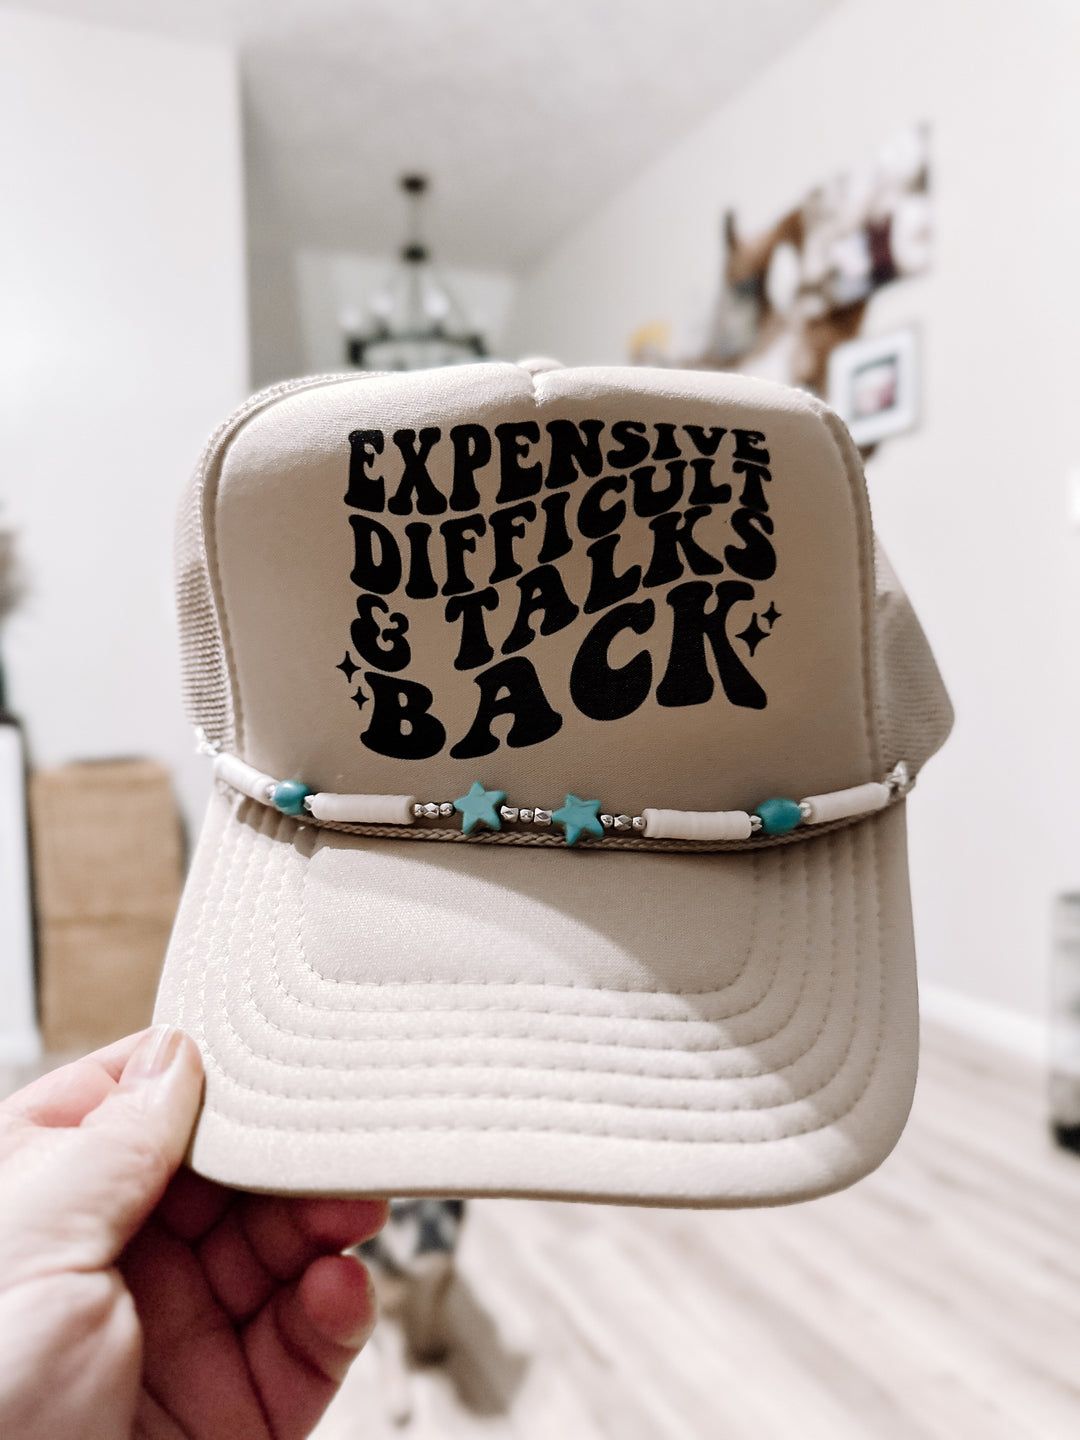 Expensive Difficult & Talks Back Trucker Hat